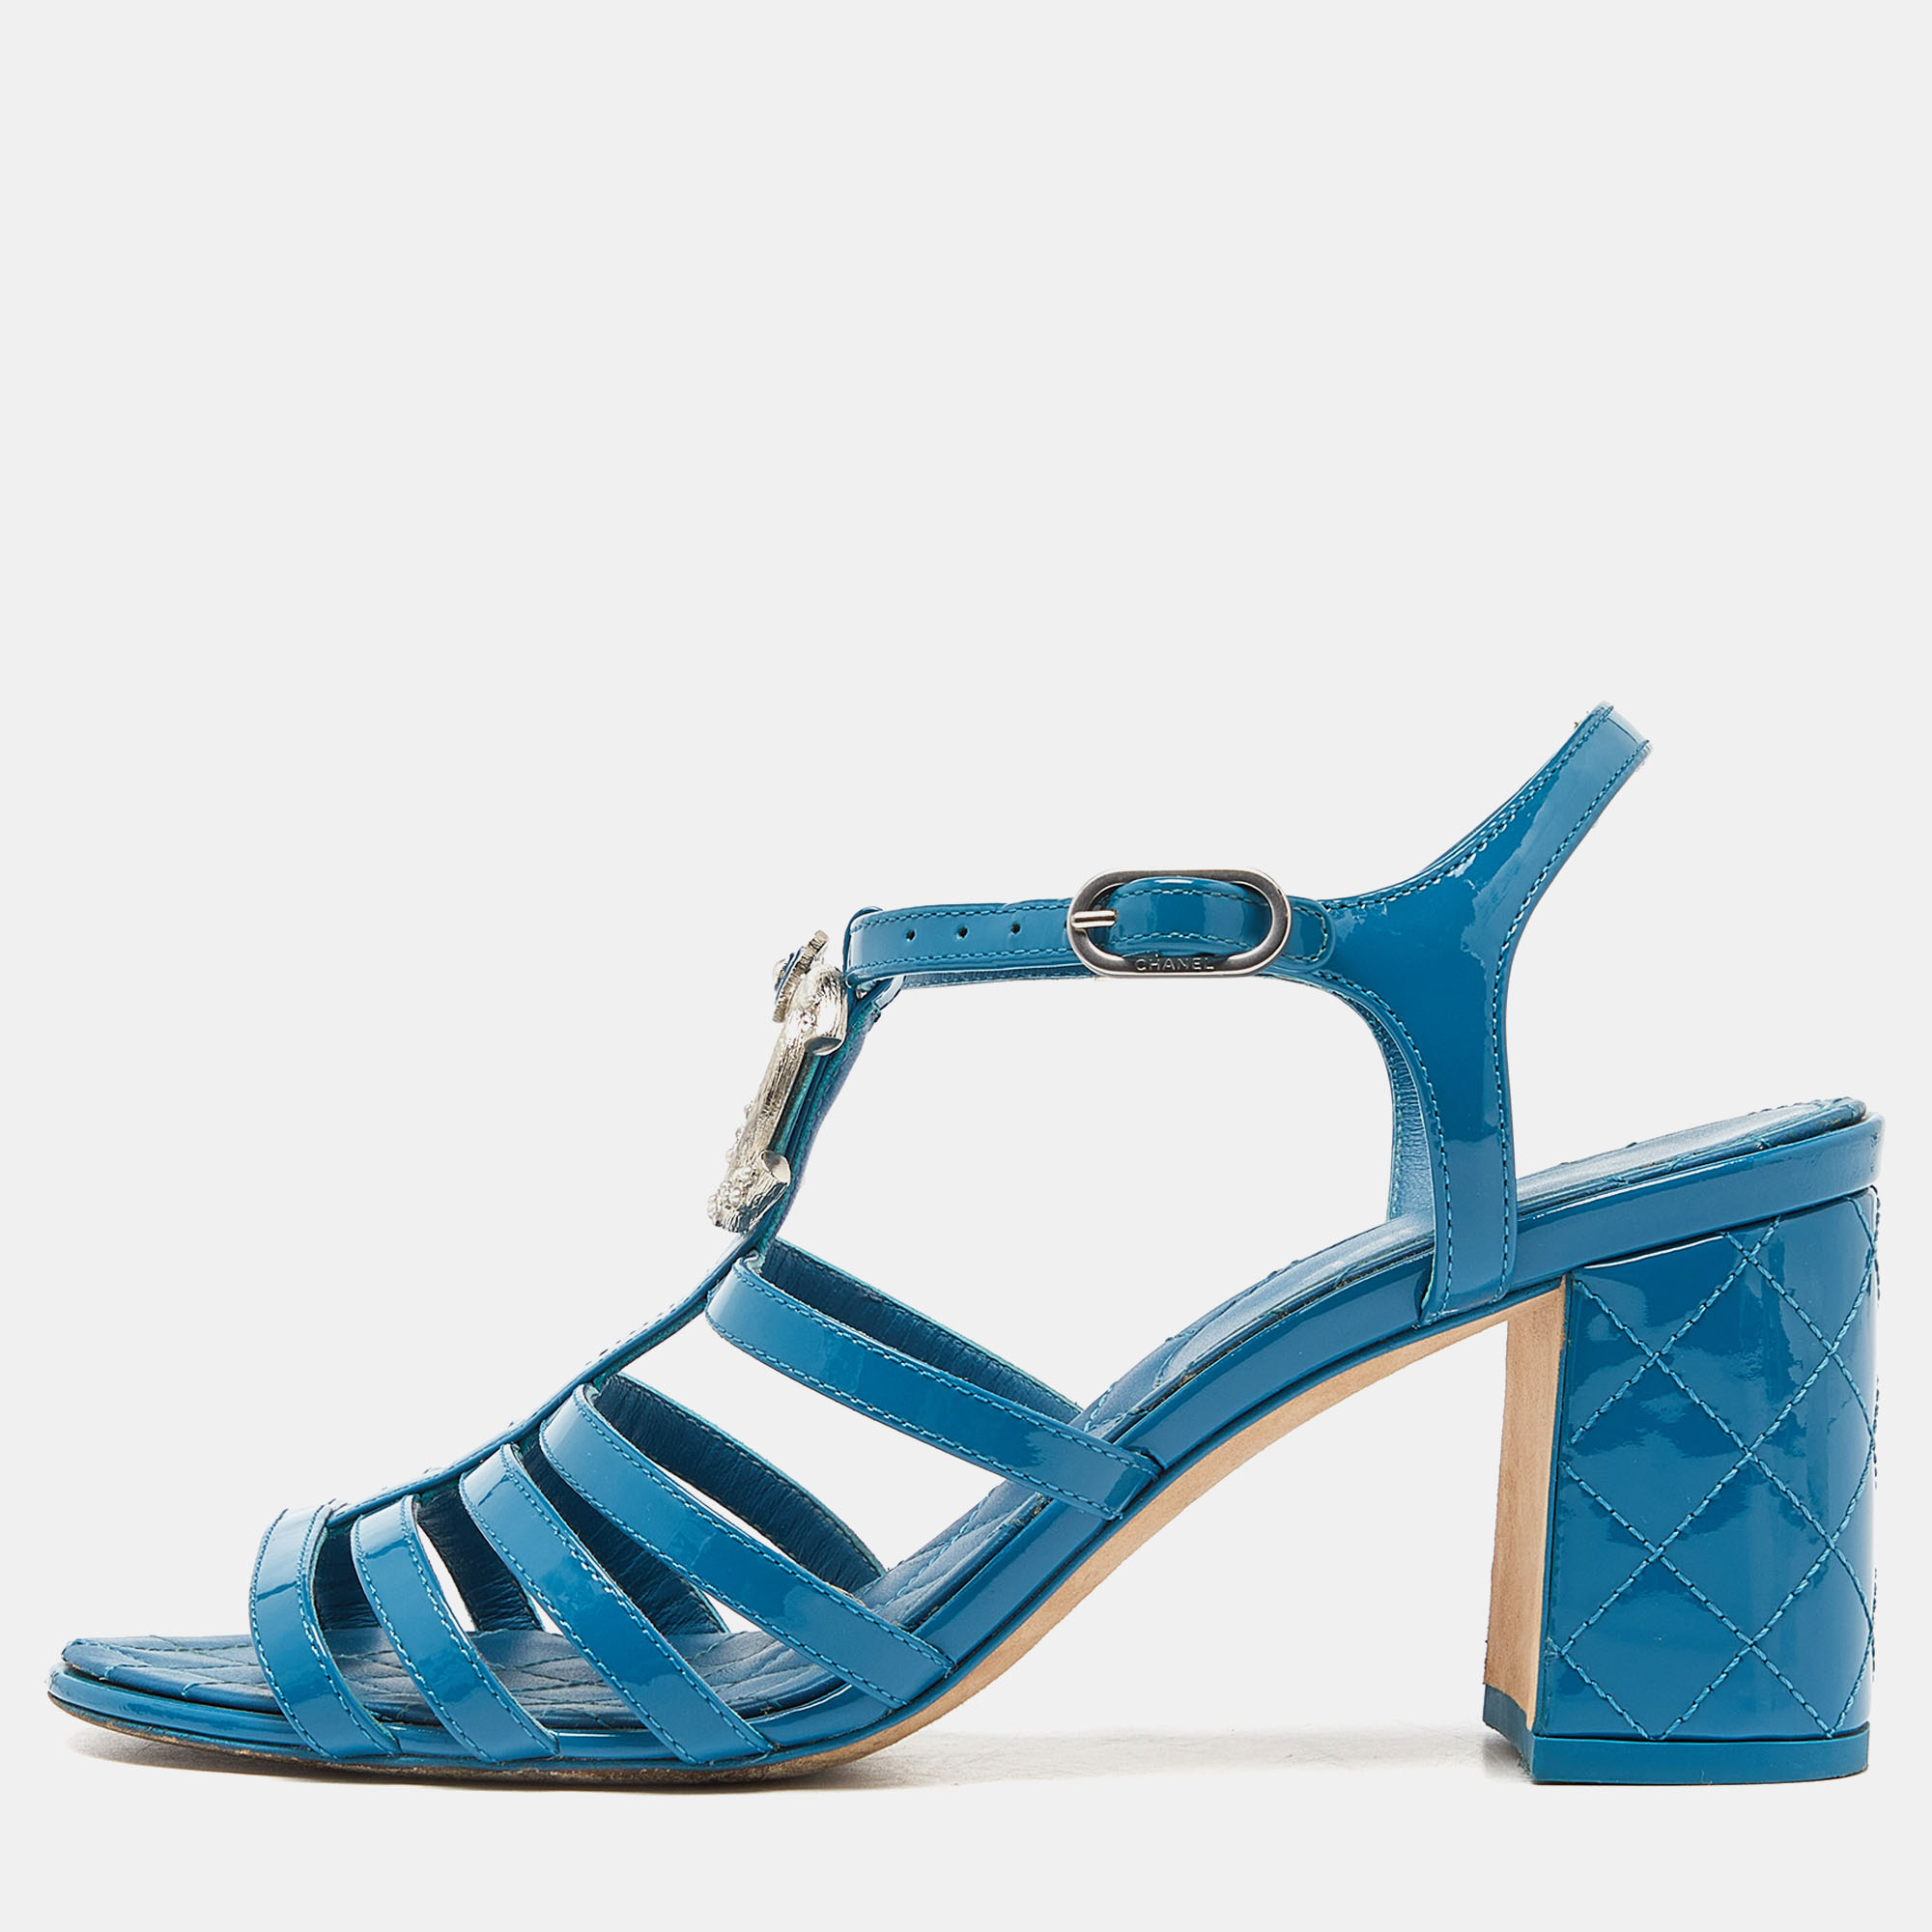 Pre-owned Chanel Blue Patent Leather Cc Block Heel Strappy Sandals Size 37